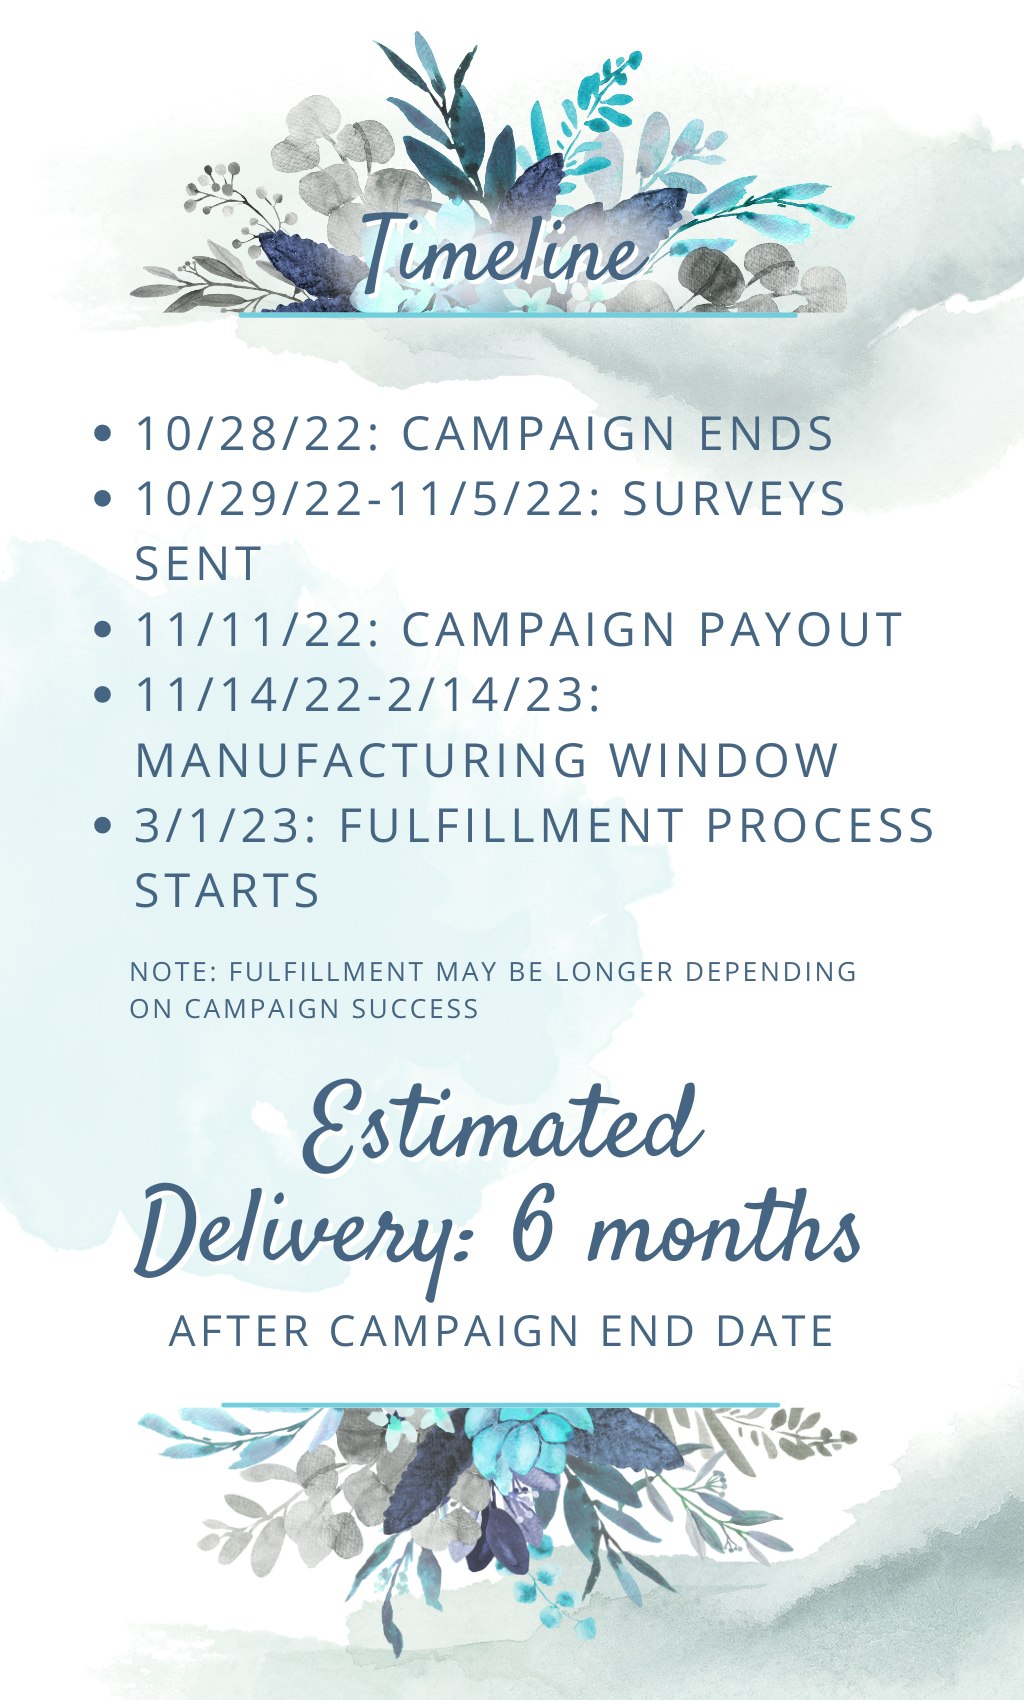 Timeline: October 28, 2002 is when the campaign ends. From October 29 until November 5th we will issue surveys. November 11 is the approximate campaign payout date for funds collected. Manufacturing will run from November 14 until February 2023. Fulfillment process will begin in March 2023.